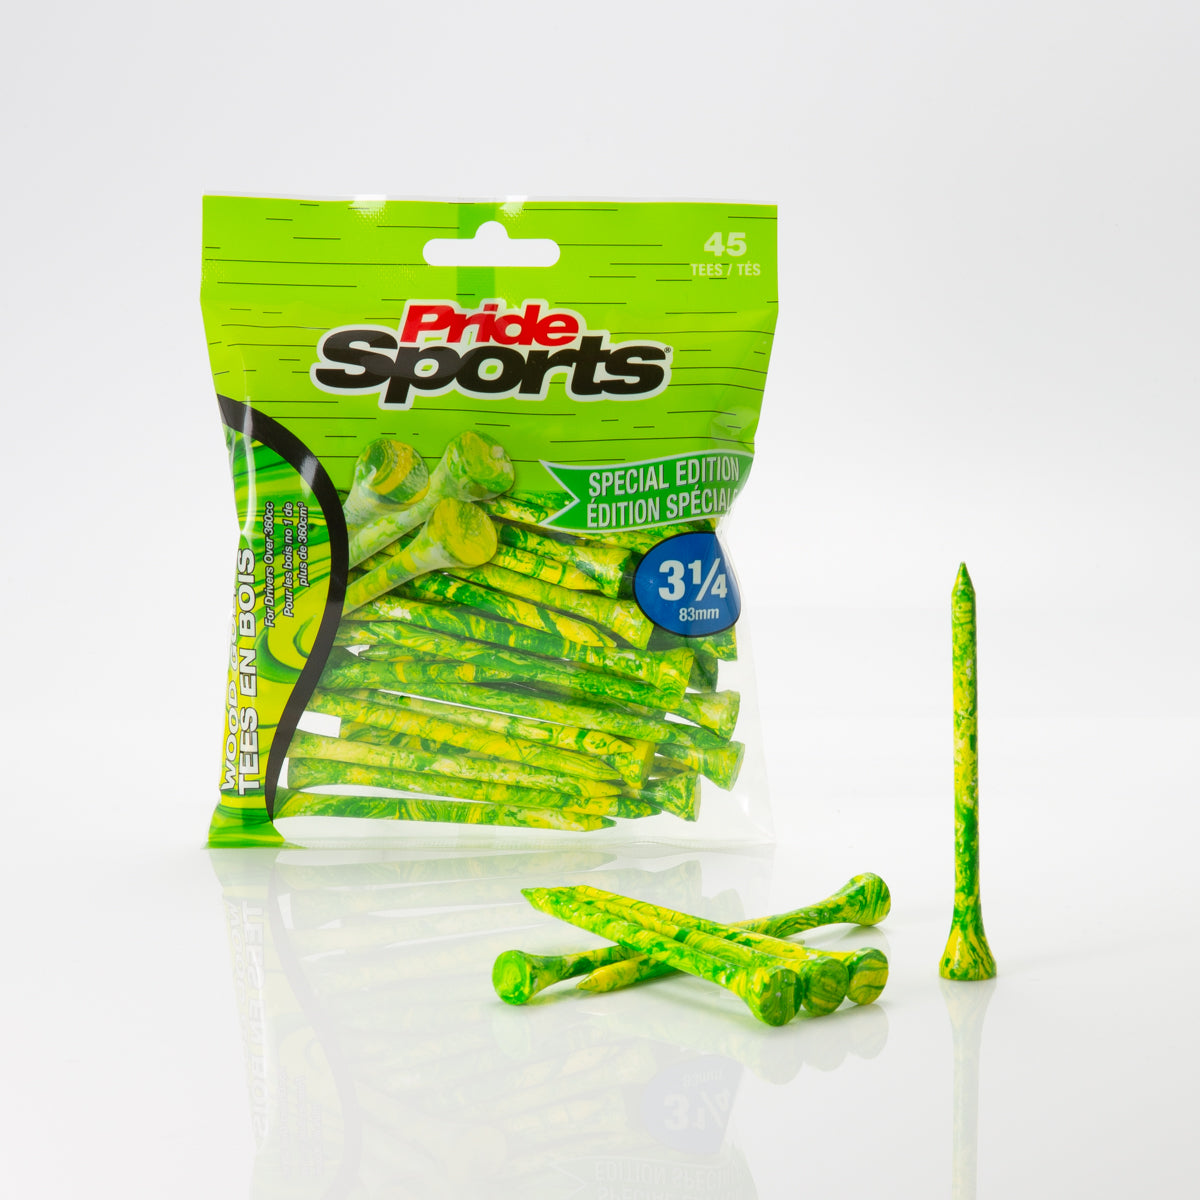 Pridesports  Special Edition Paint Splatter (Green/Yellow) - Available in 2 sizes